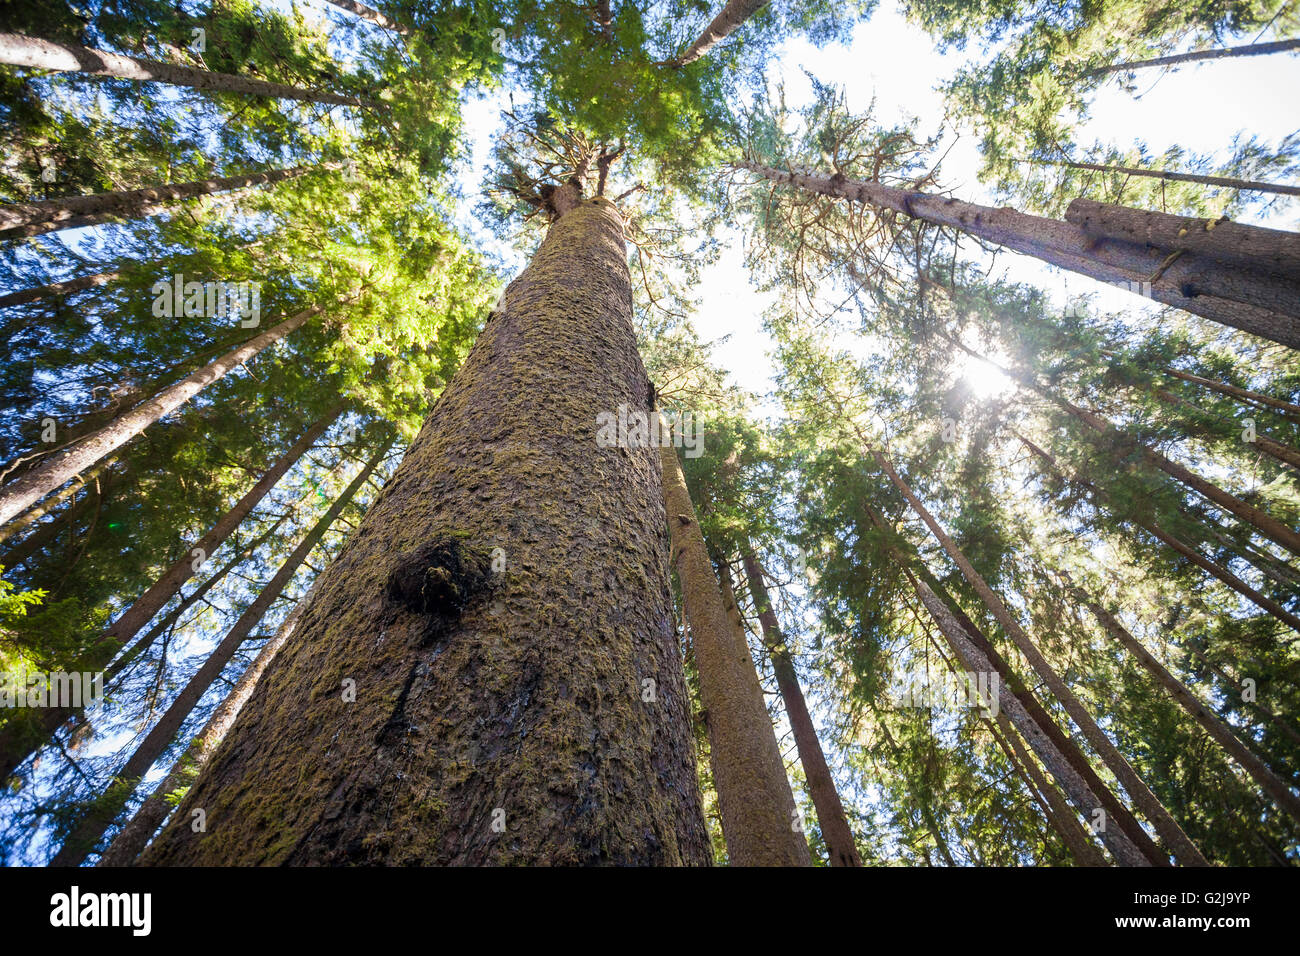 Looking up a tall Sitka spruce tree (Picea sitchensis) at China Beach in Juan de Fuca Provincal Park Vancouver Island BC Canada. Stock Photo